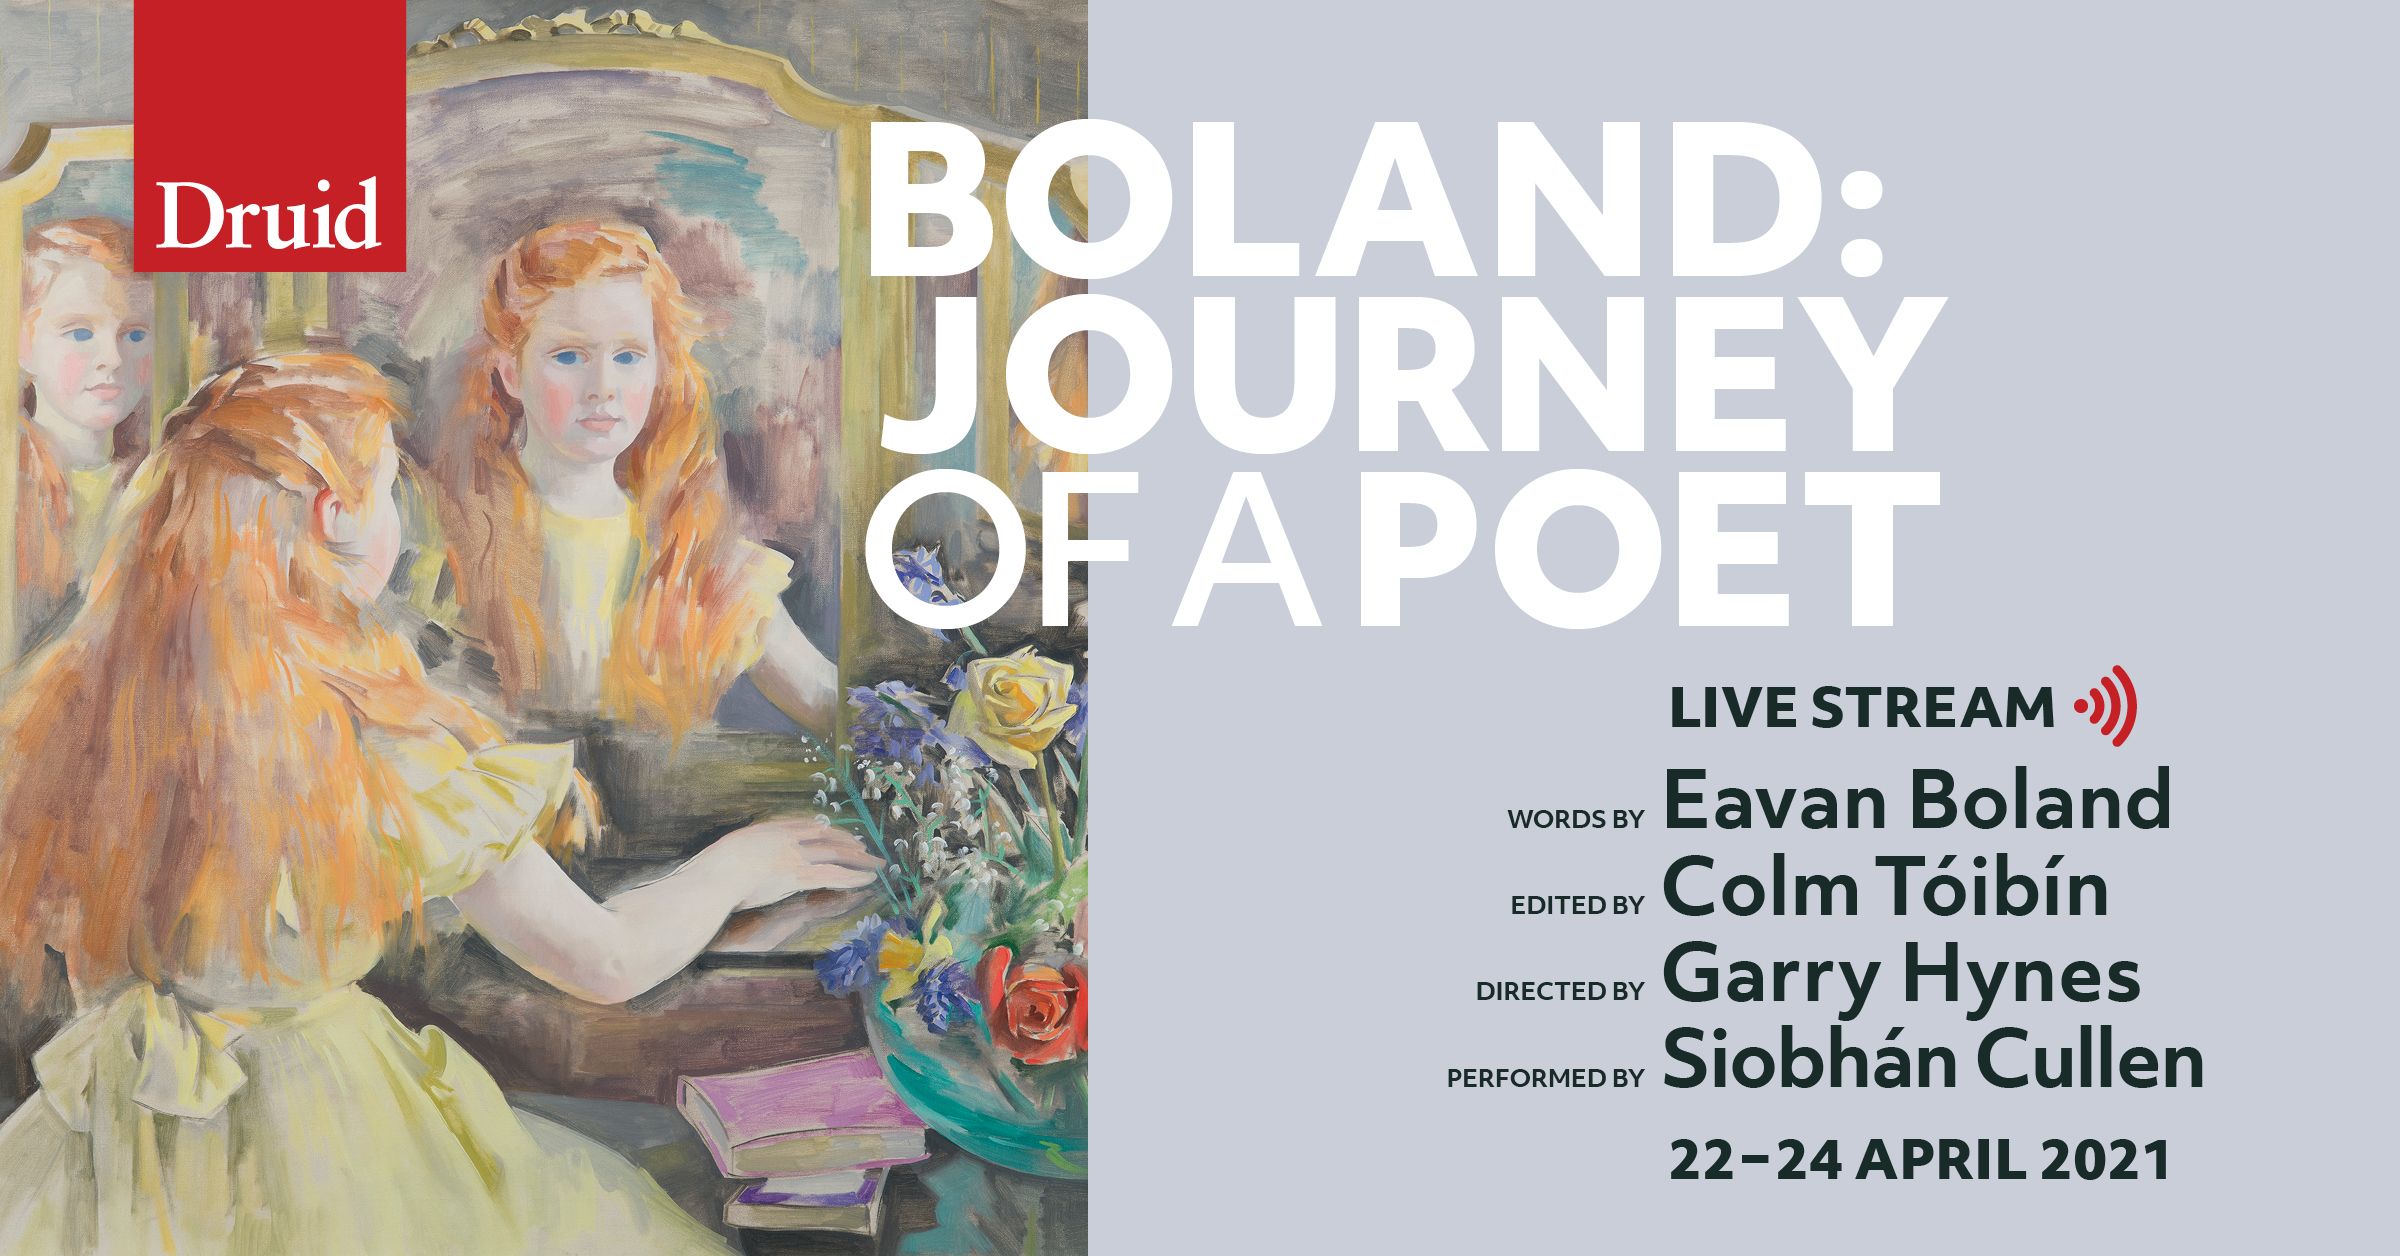 Boland Journey of a Poet presented by Druid Theatre in partnership with Lime Tree Theatre will be live streamed Thursday 22nd April to Saturday 24th April.